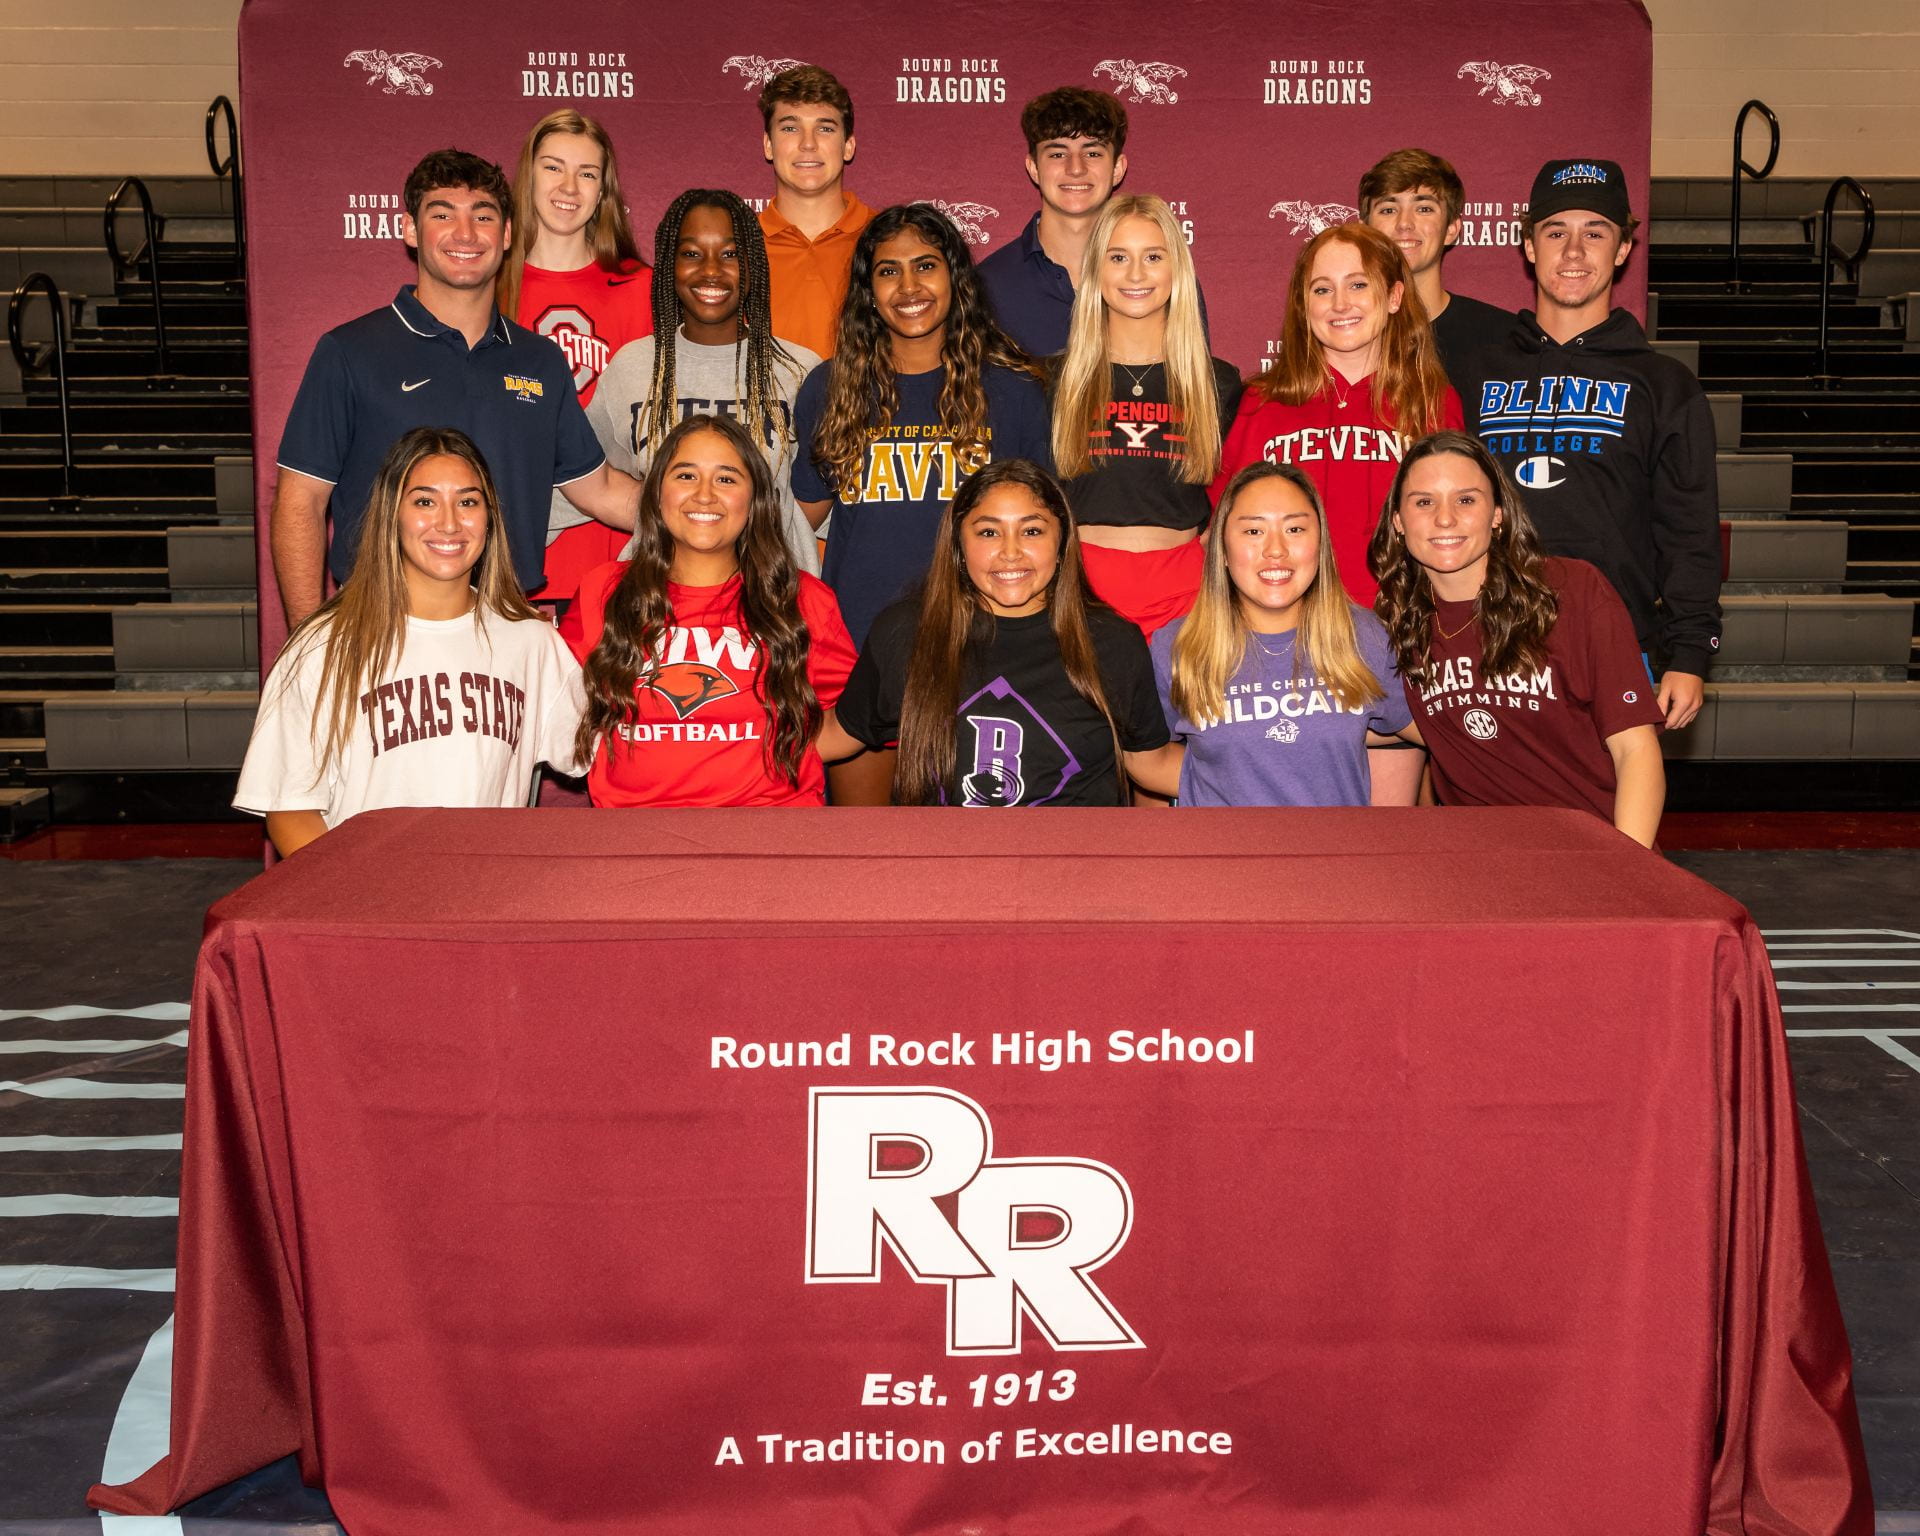 Congratulations to these Student Athletes